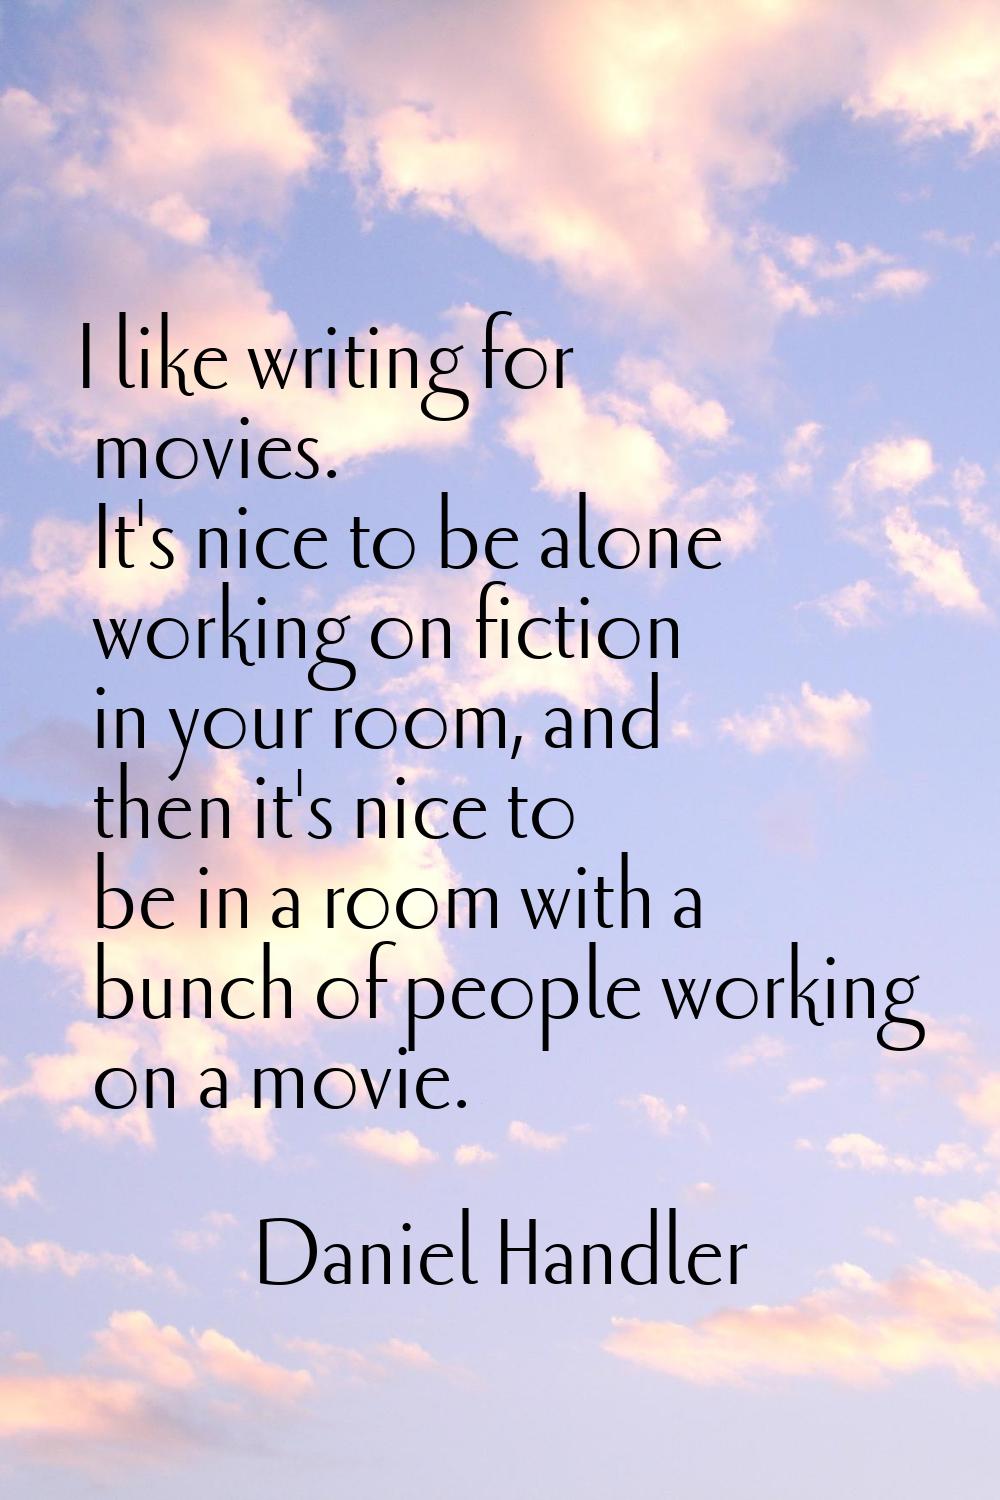 I like writing for movies. It's nice to be alone working on fiction in your room, and then it's nic